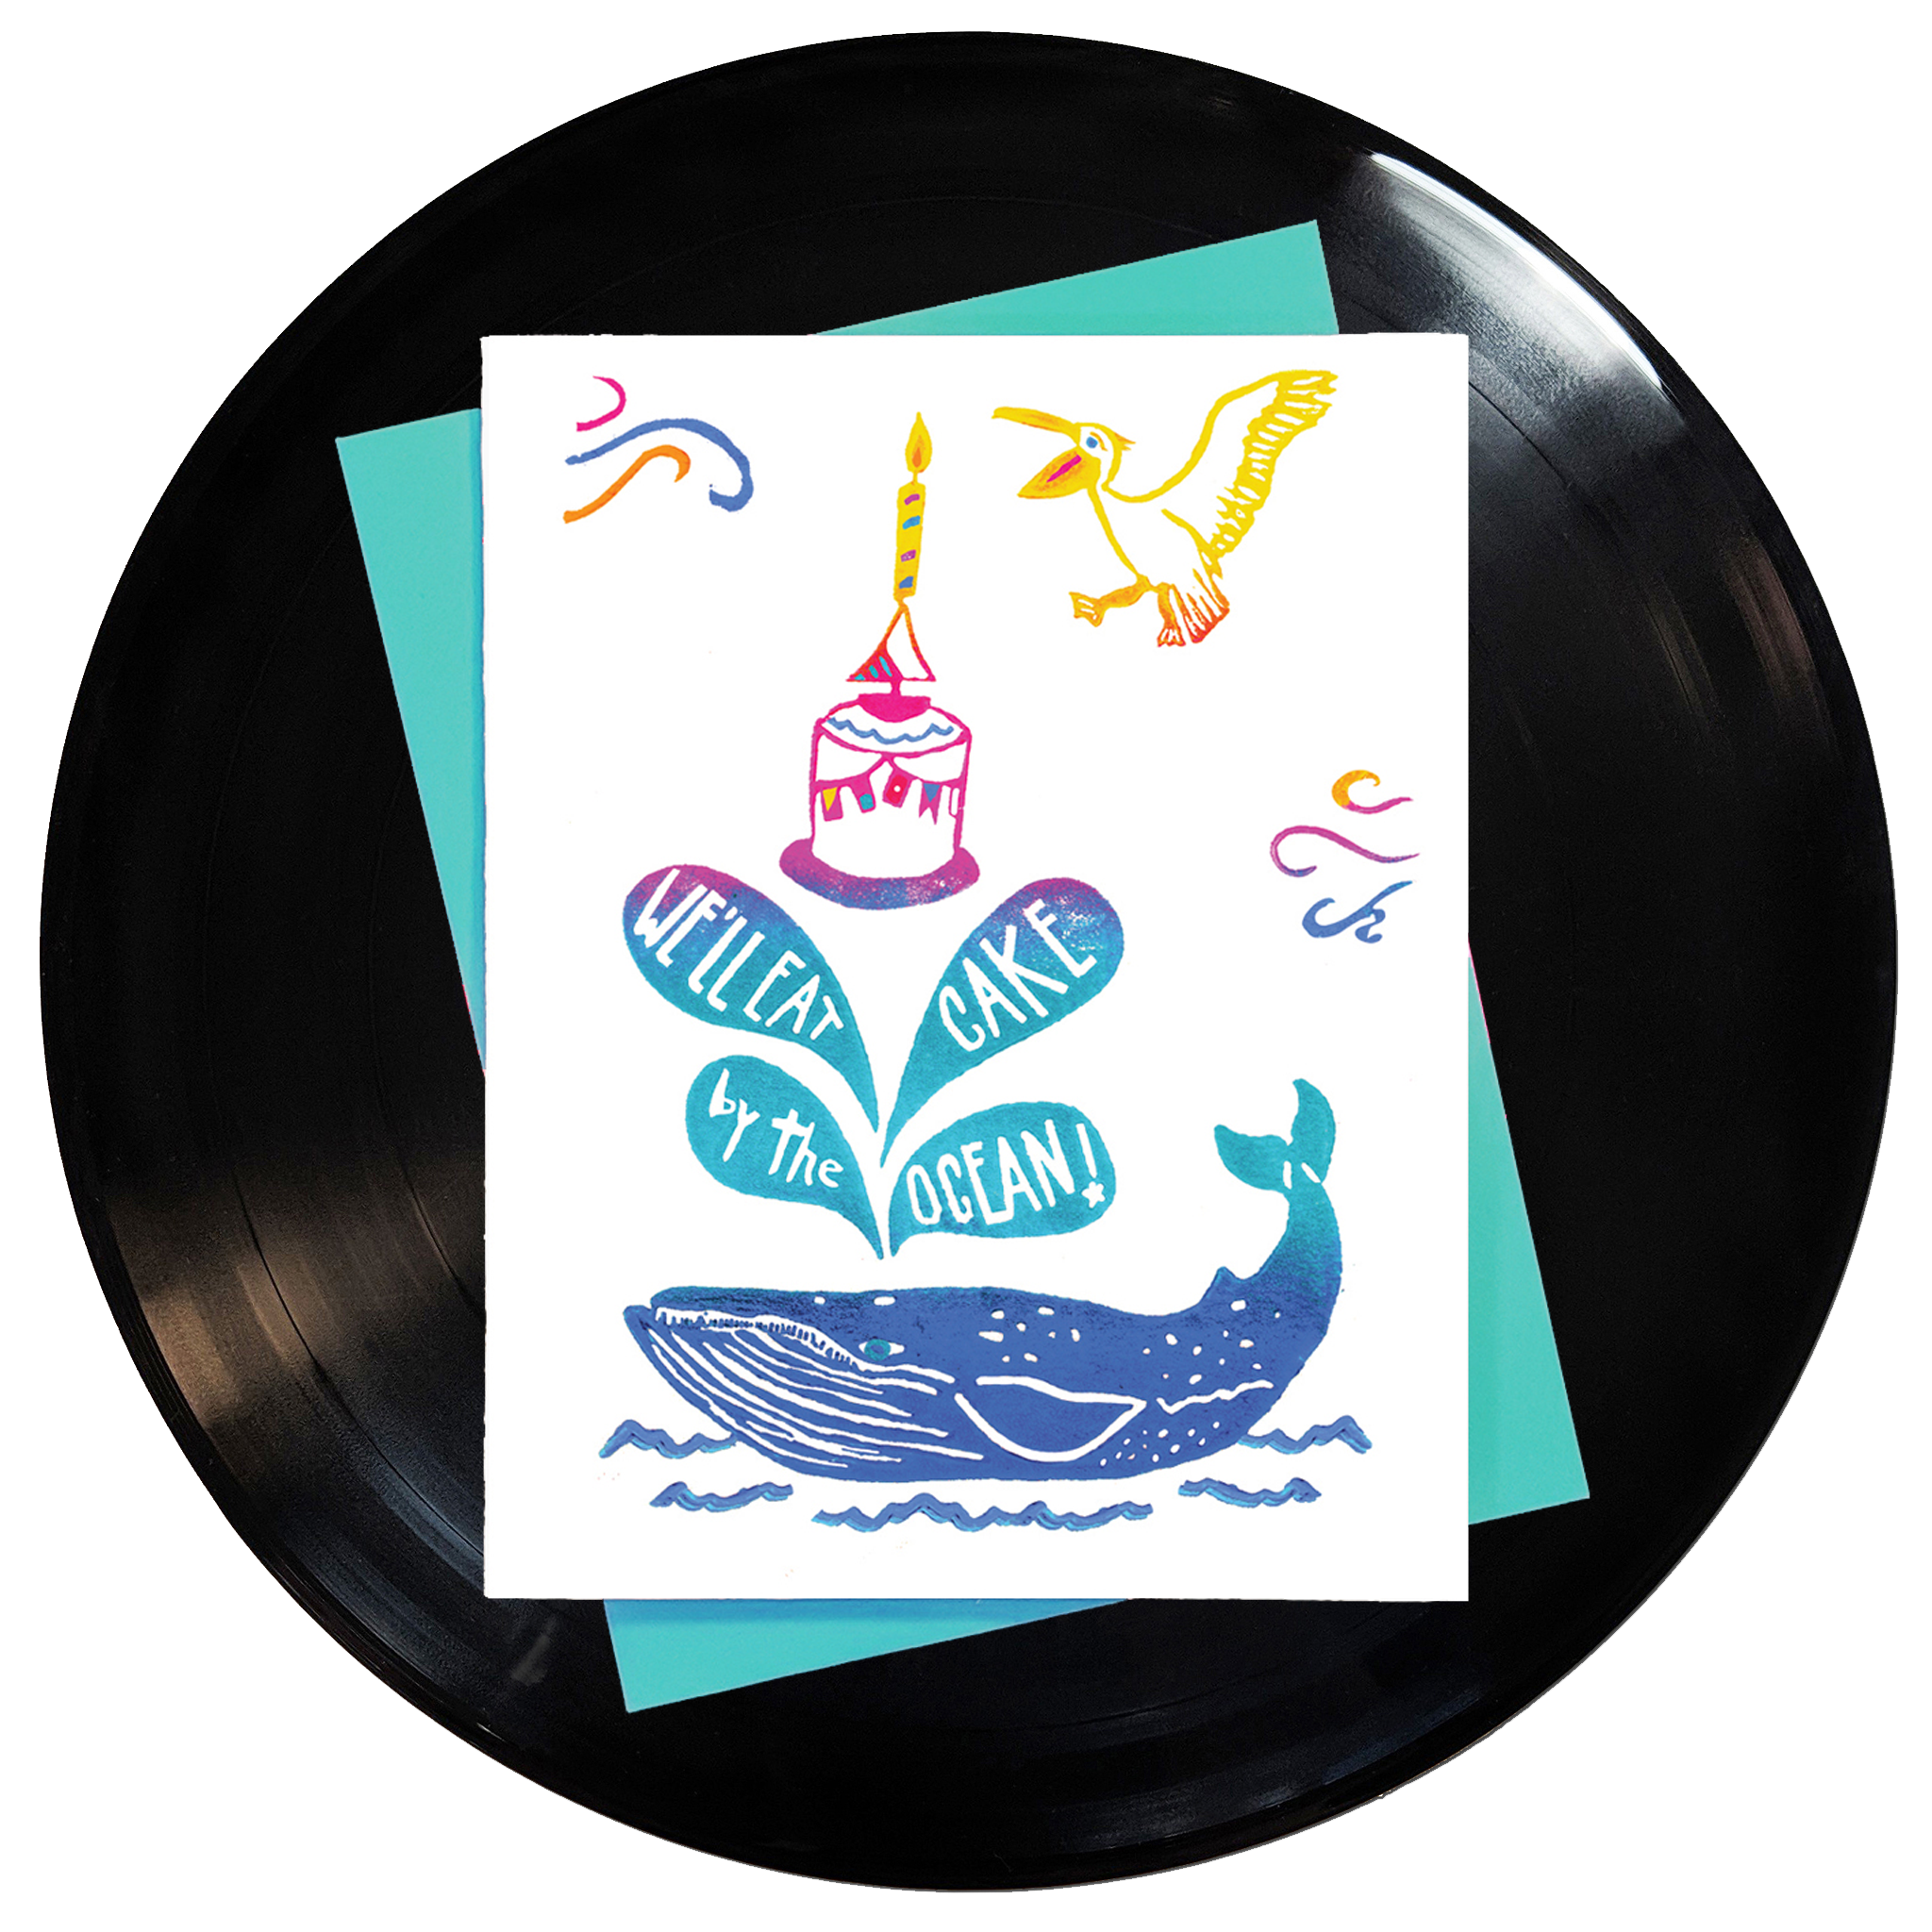 We'll Eat Cake By the Ocean Greeting Card 6-Pack Inspired By Music